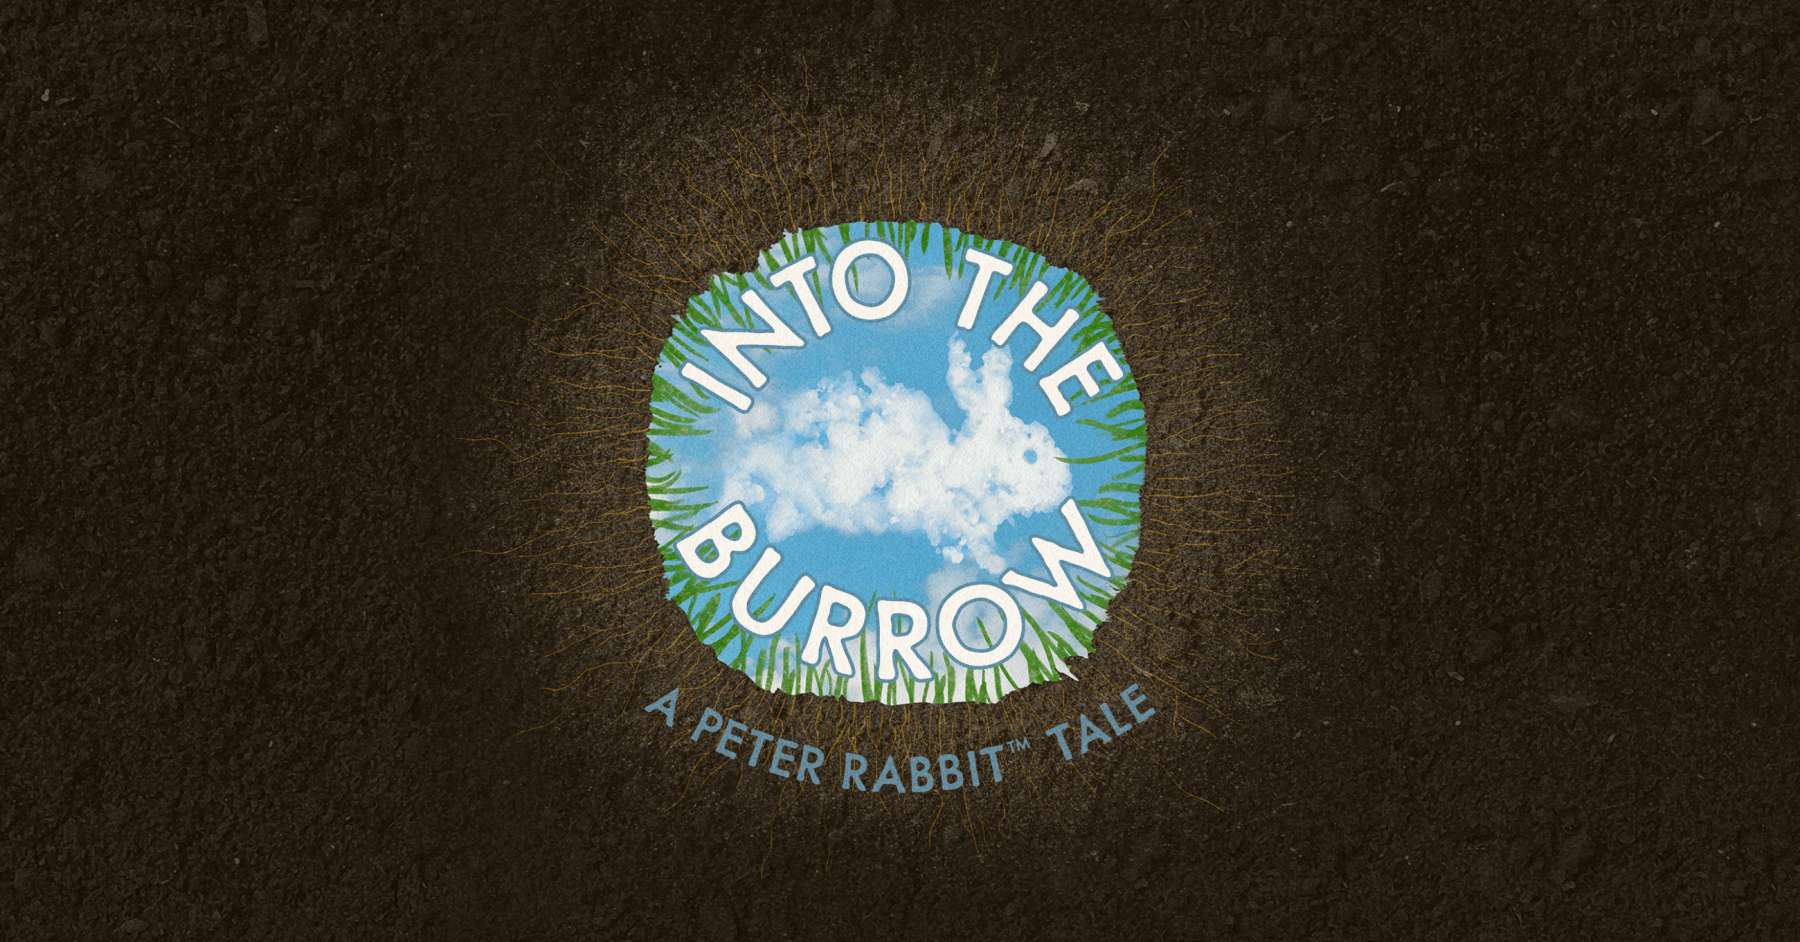 The view from inside a rabbit’s burrow looking up into the sky with a fluffy cloud in the shape of a rabbit above. Text reading "Into the Burrow: A Peter Rabbit Tale" in white, blocked letters with a blue outline, arranged in the shape of a circle.